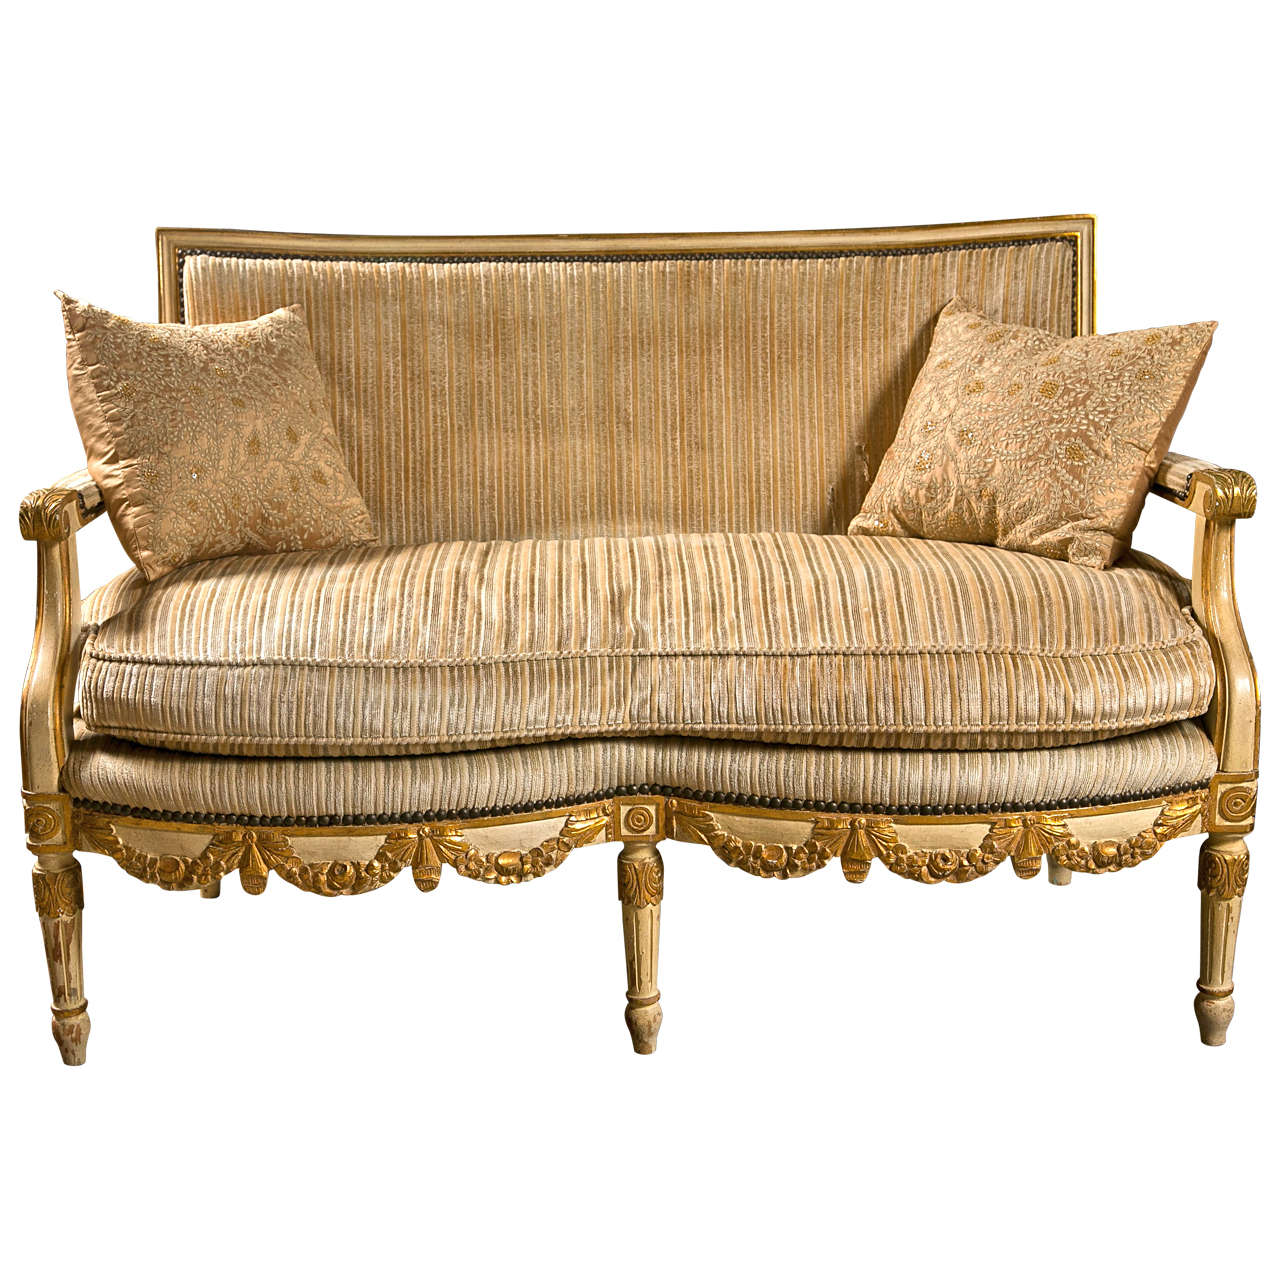 French Louis XIV Style Canape Sofa Settee at 1stdibs